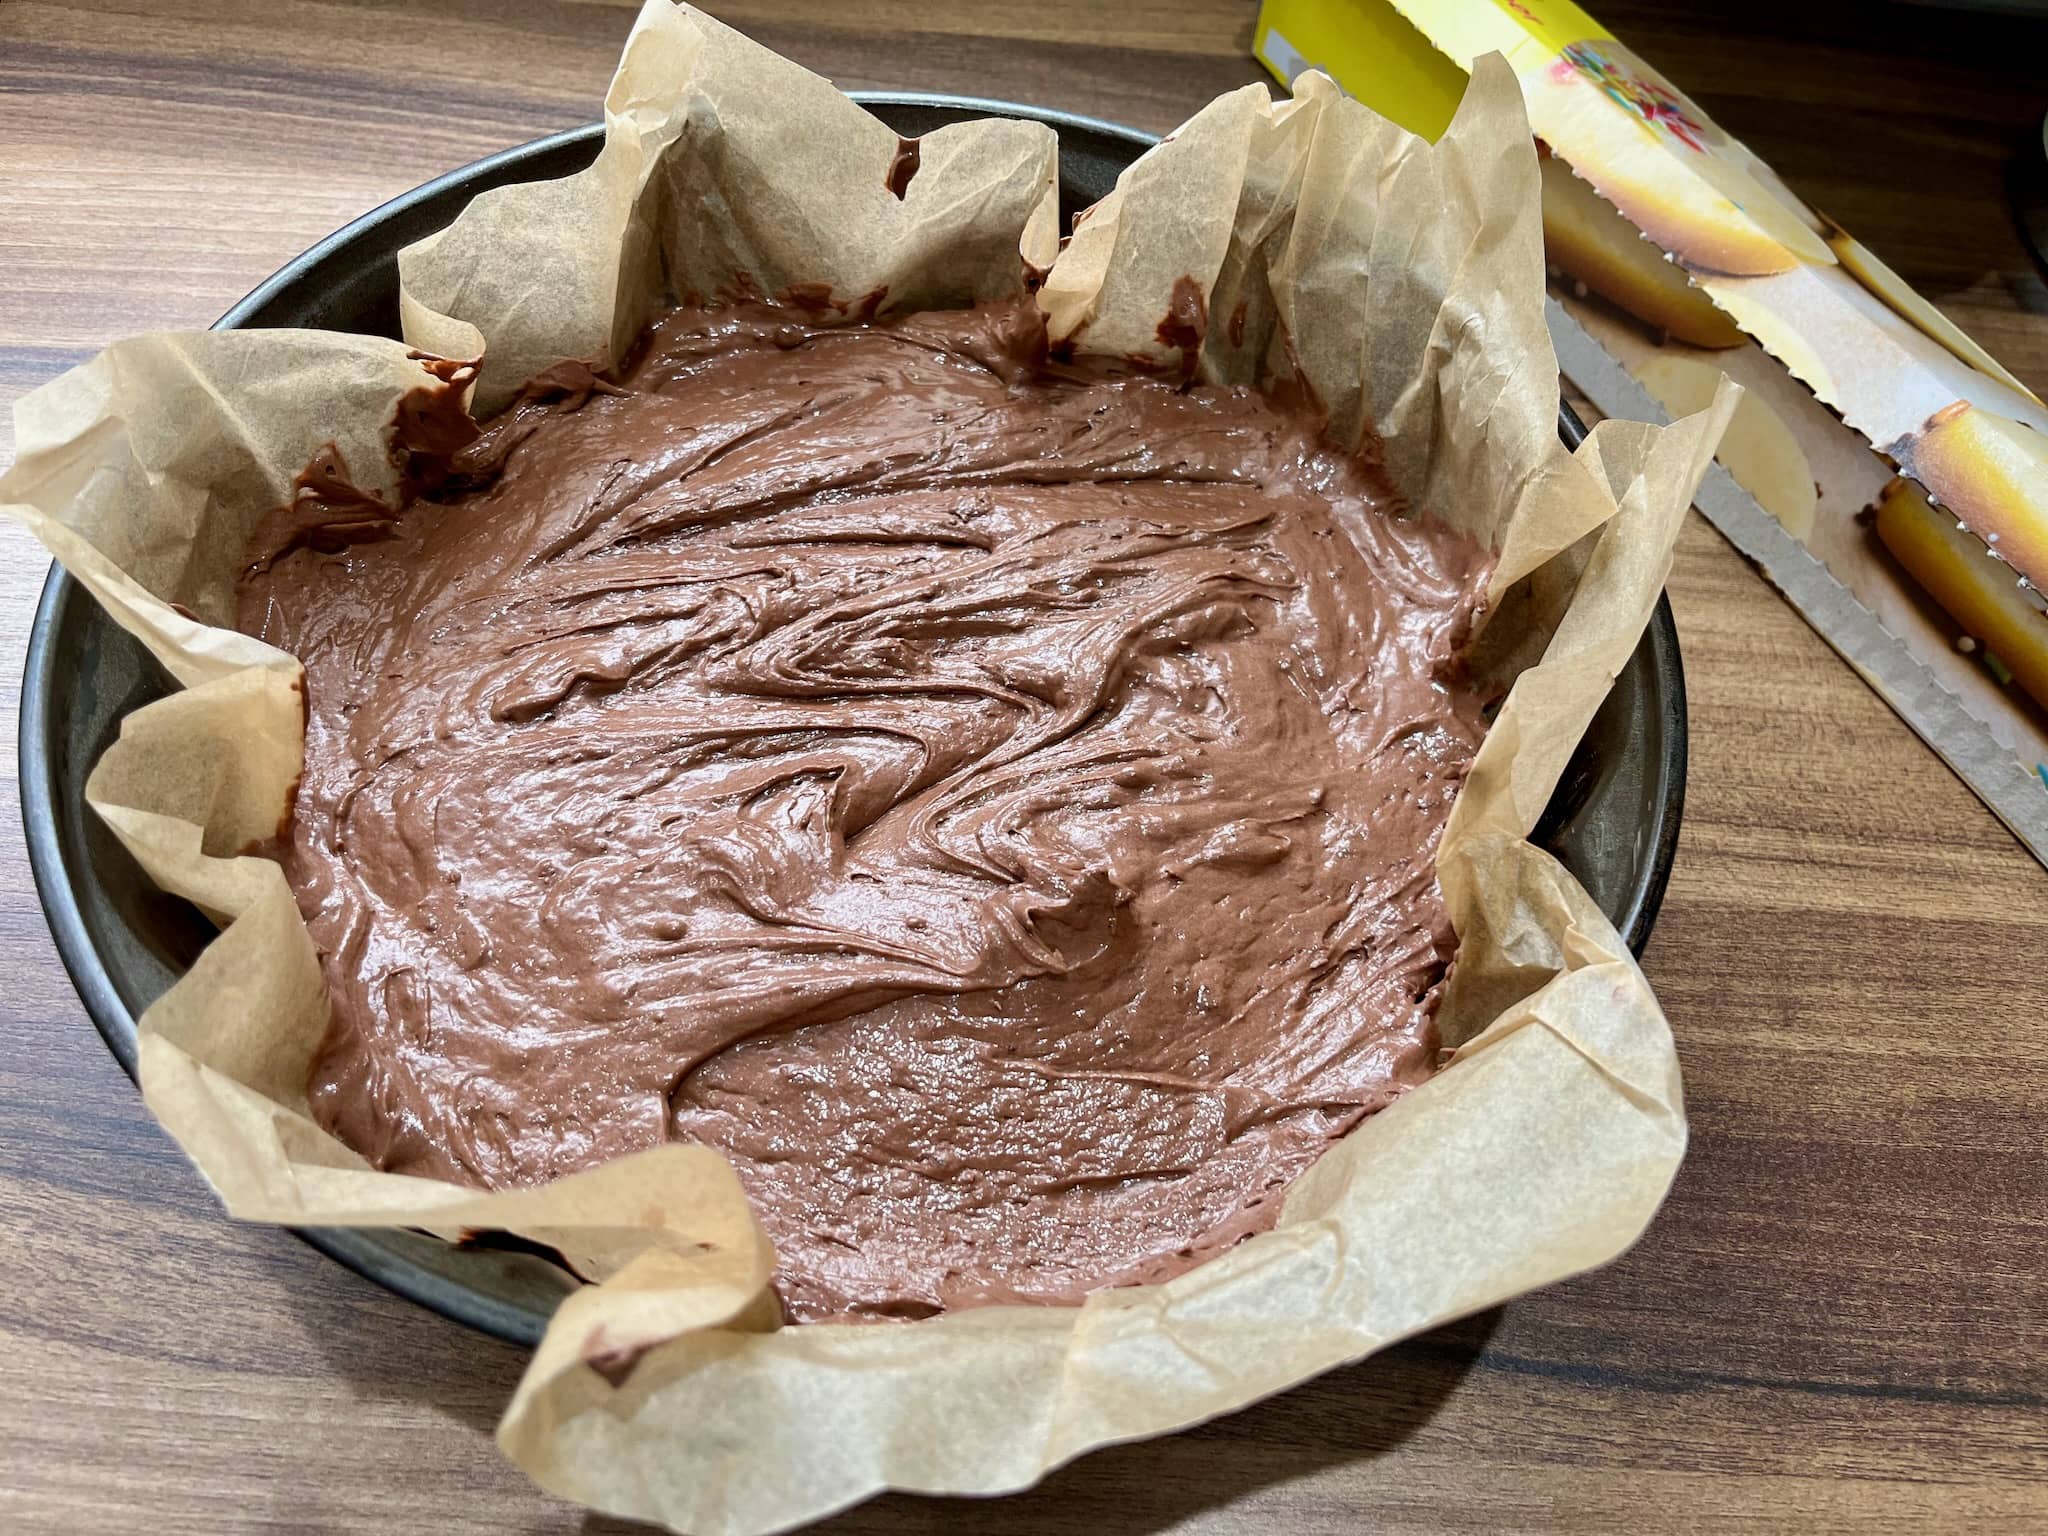 Chocolate cake mixture in a baking tray